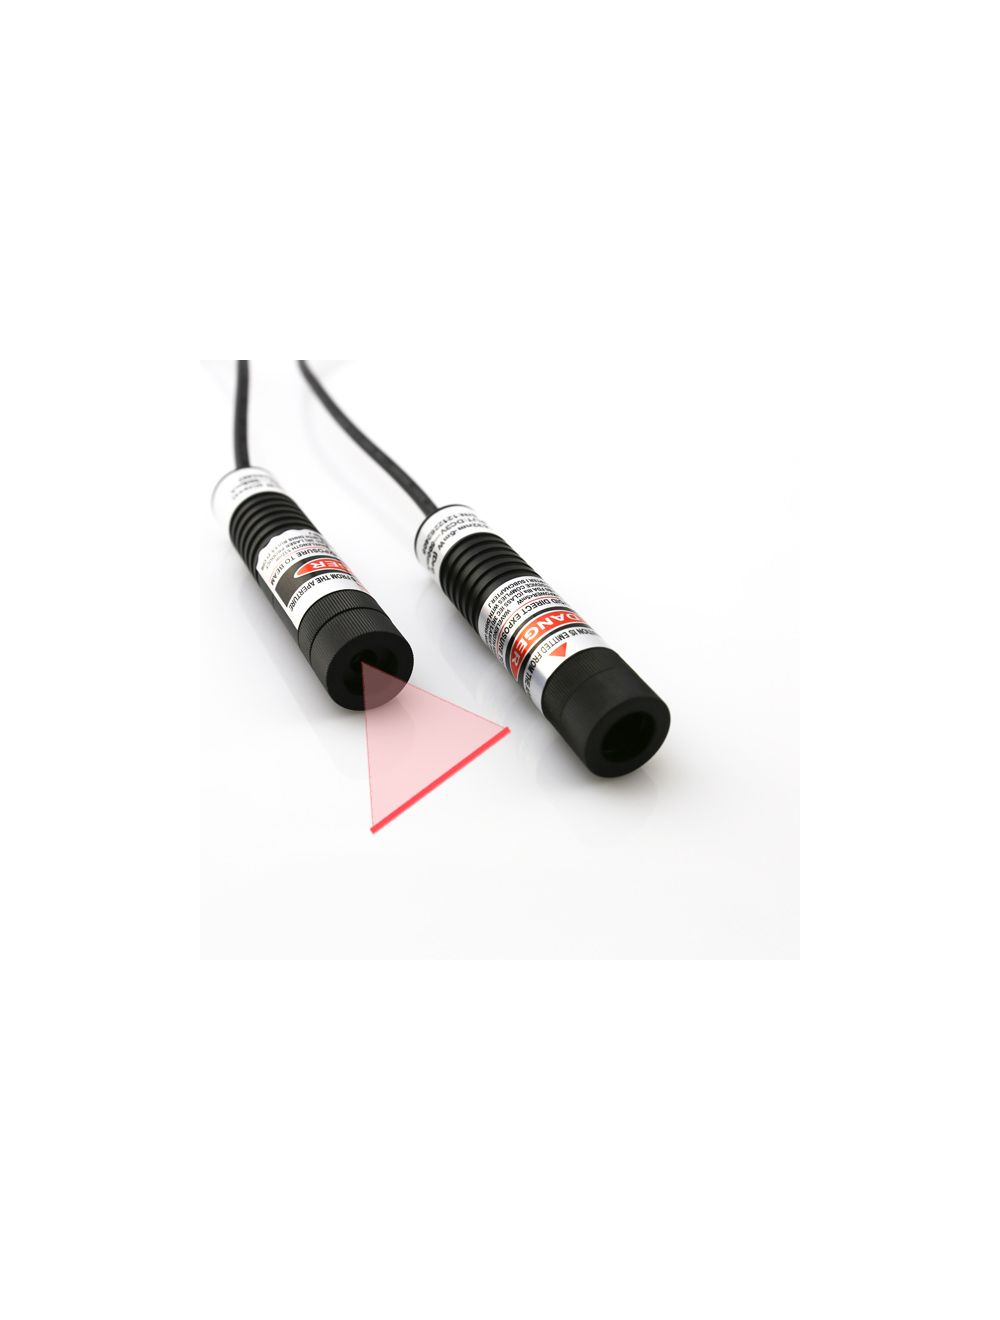 Line laser system bright red 20mw 635nm 